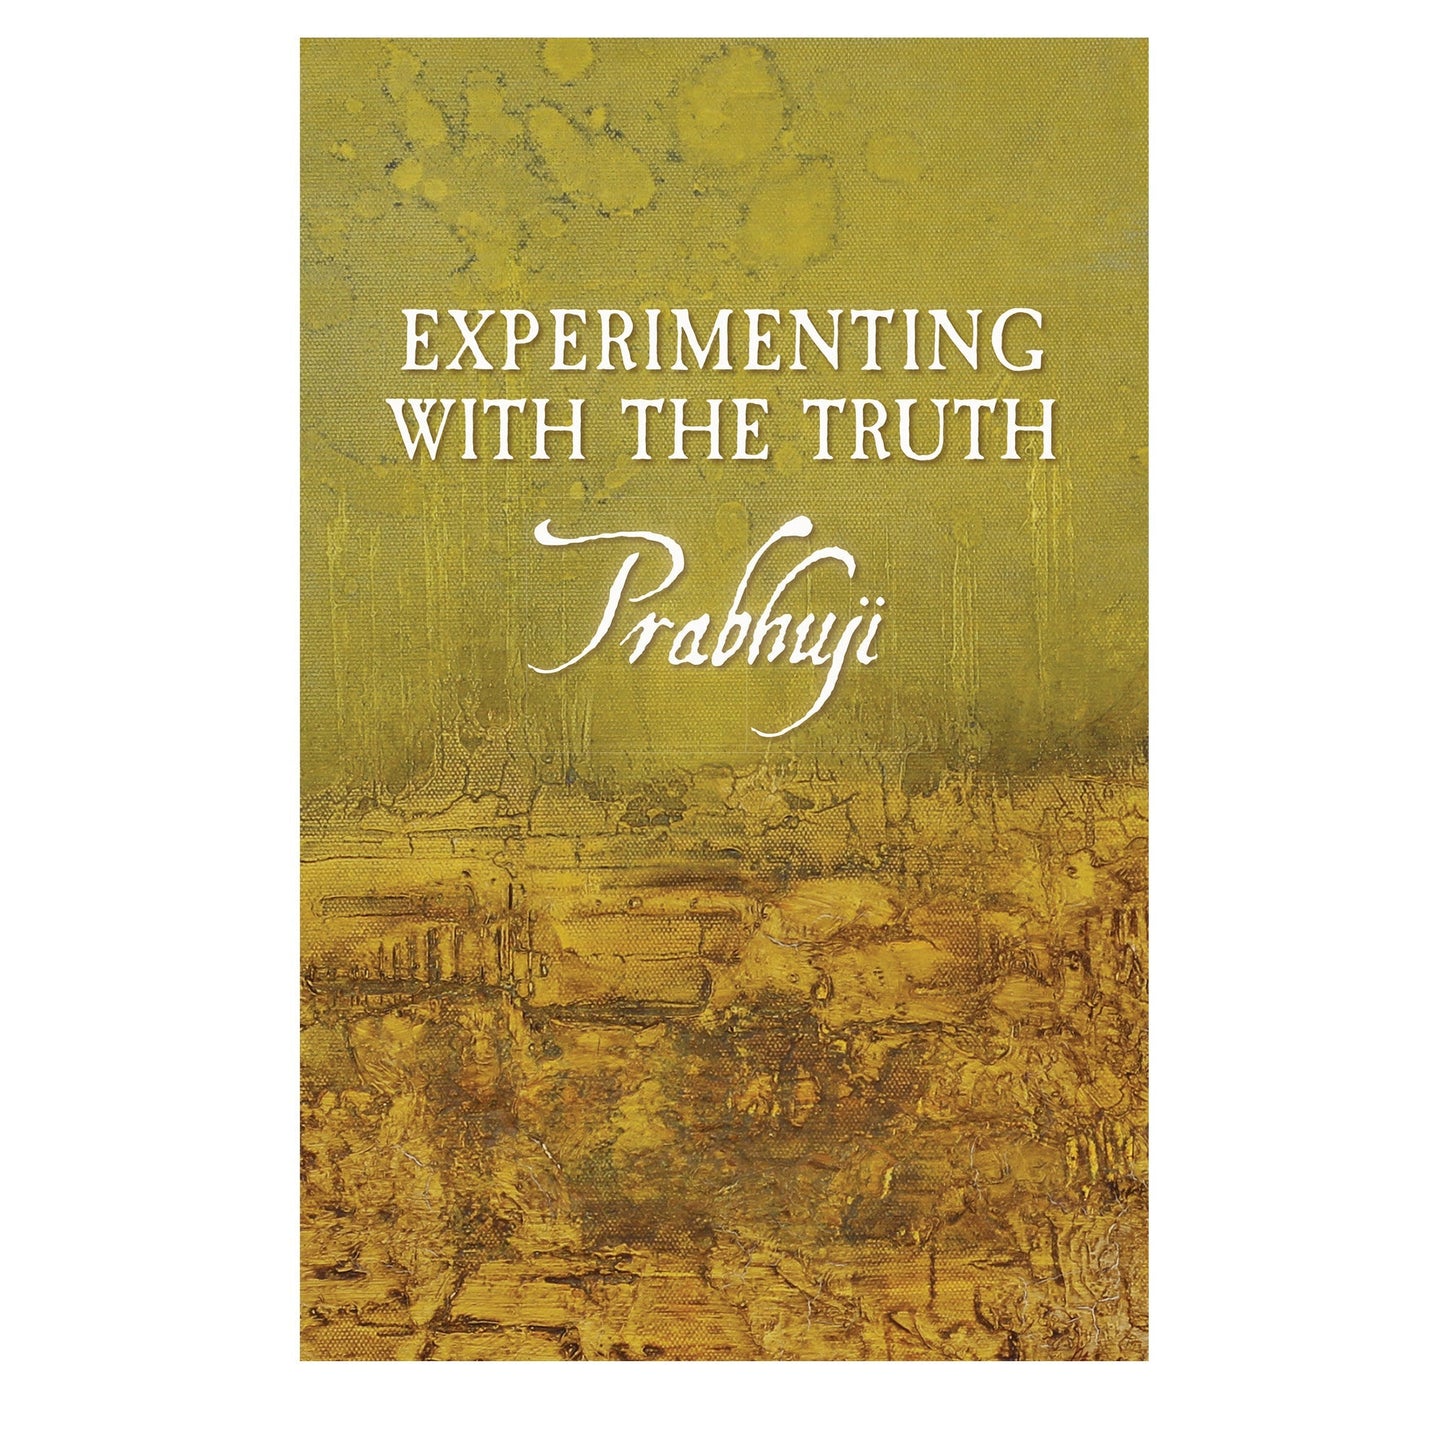 Experimenting with the Truth by Prabhuji (Paperback - English) - Tree Spirit Wellness